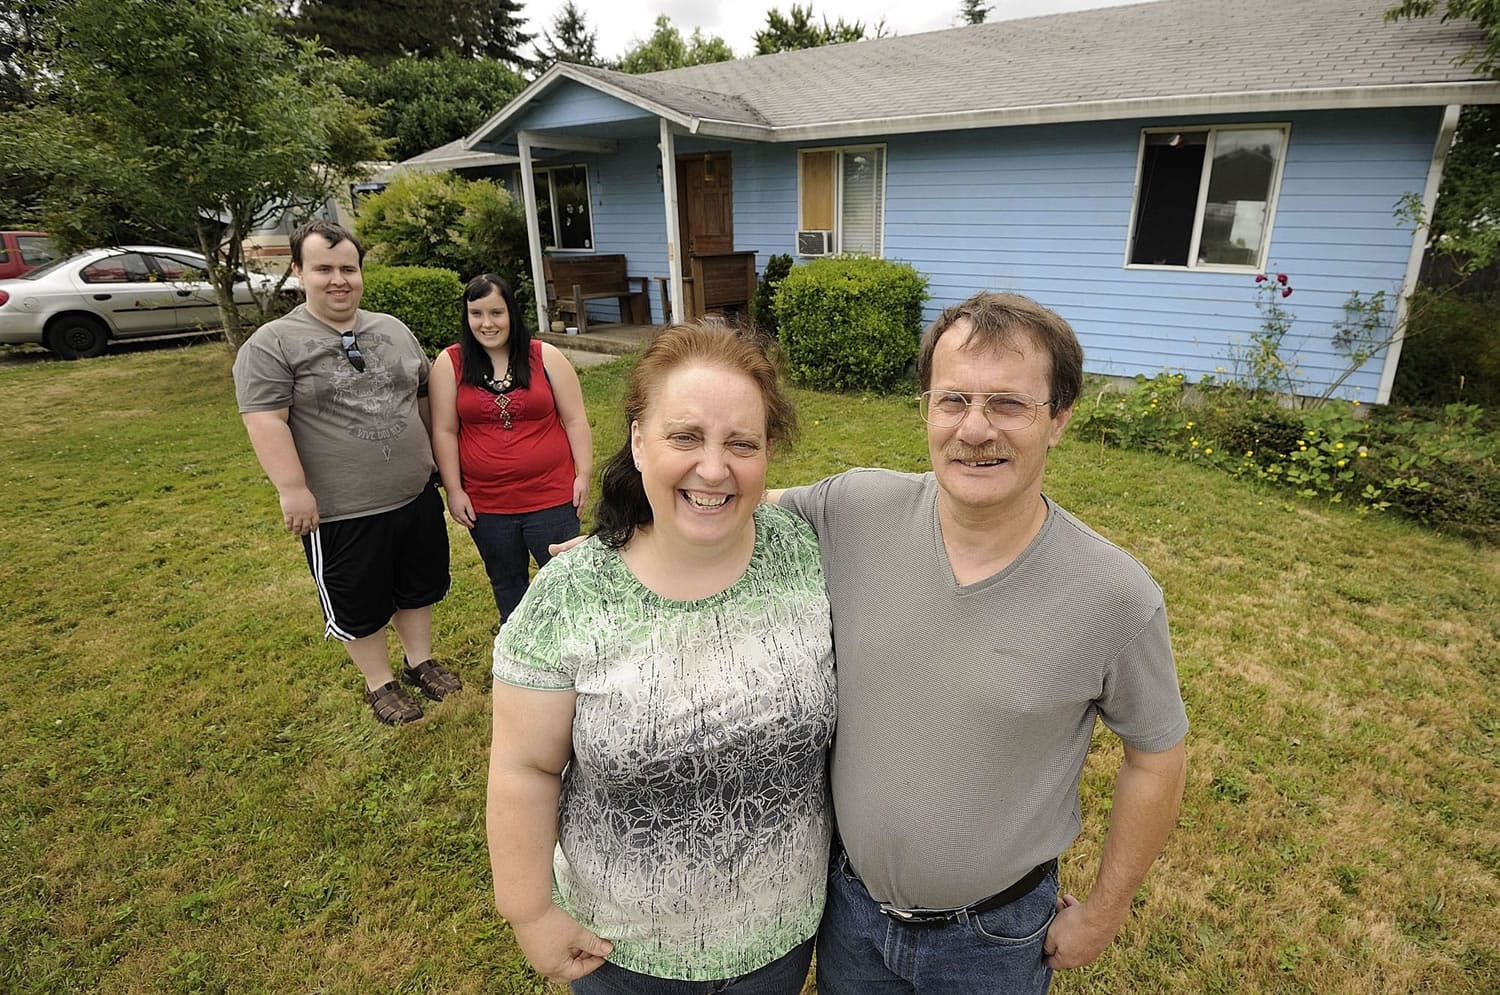 Nearly 20 years after they helped build it, the Johnson family -- from left, Joshua, Elishia, Cindy and Michael -- still live in their sky-blue Evergreen Habitat for Humanity home.